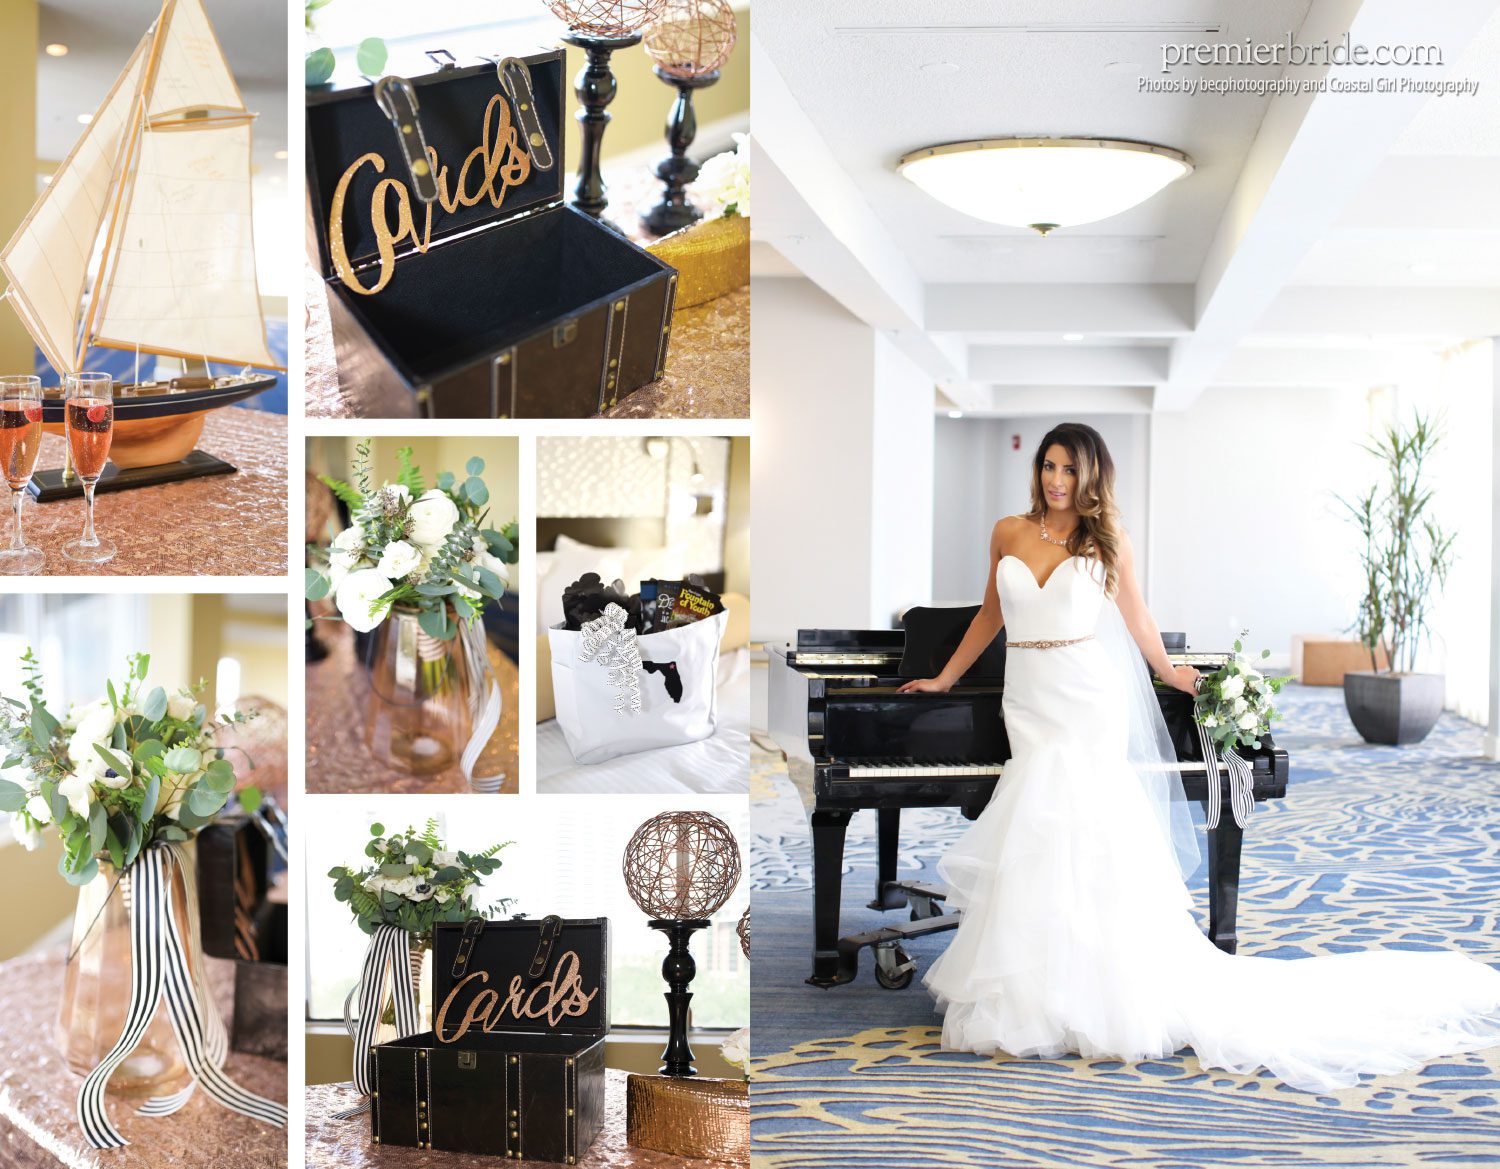 Love Bridal Boutique, photos by becphotography and Coastal Girl Photography